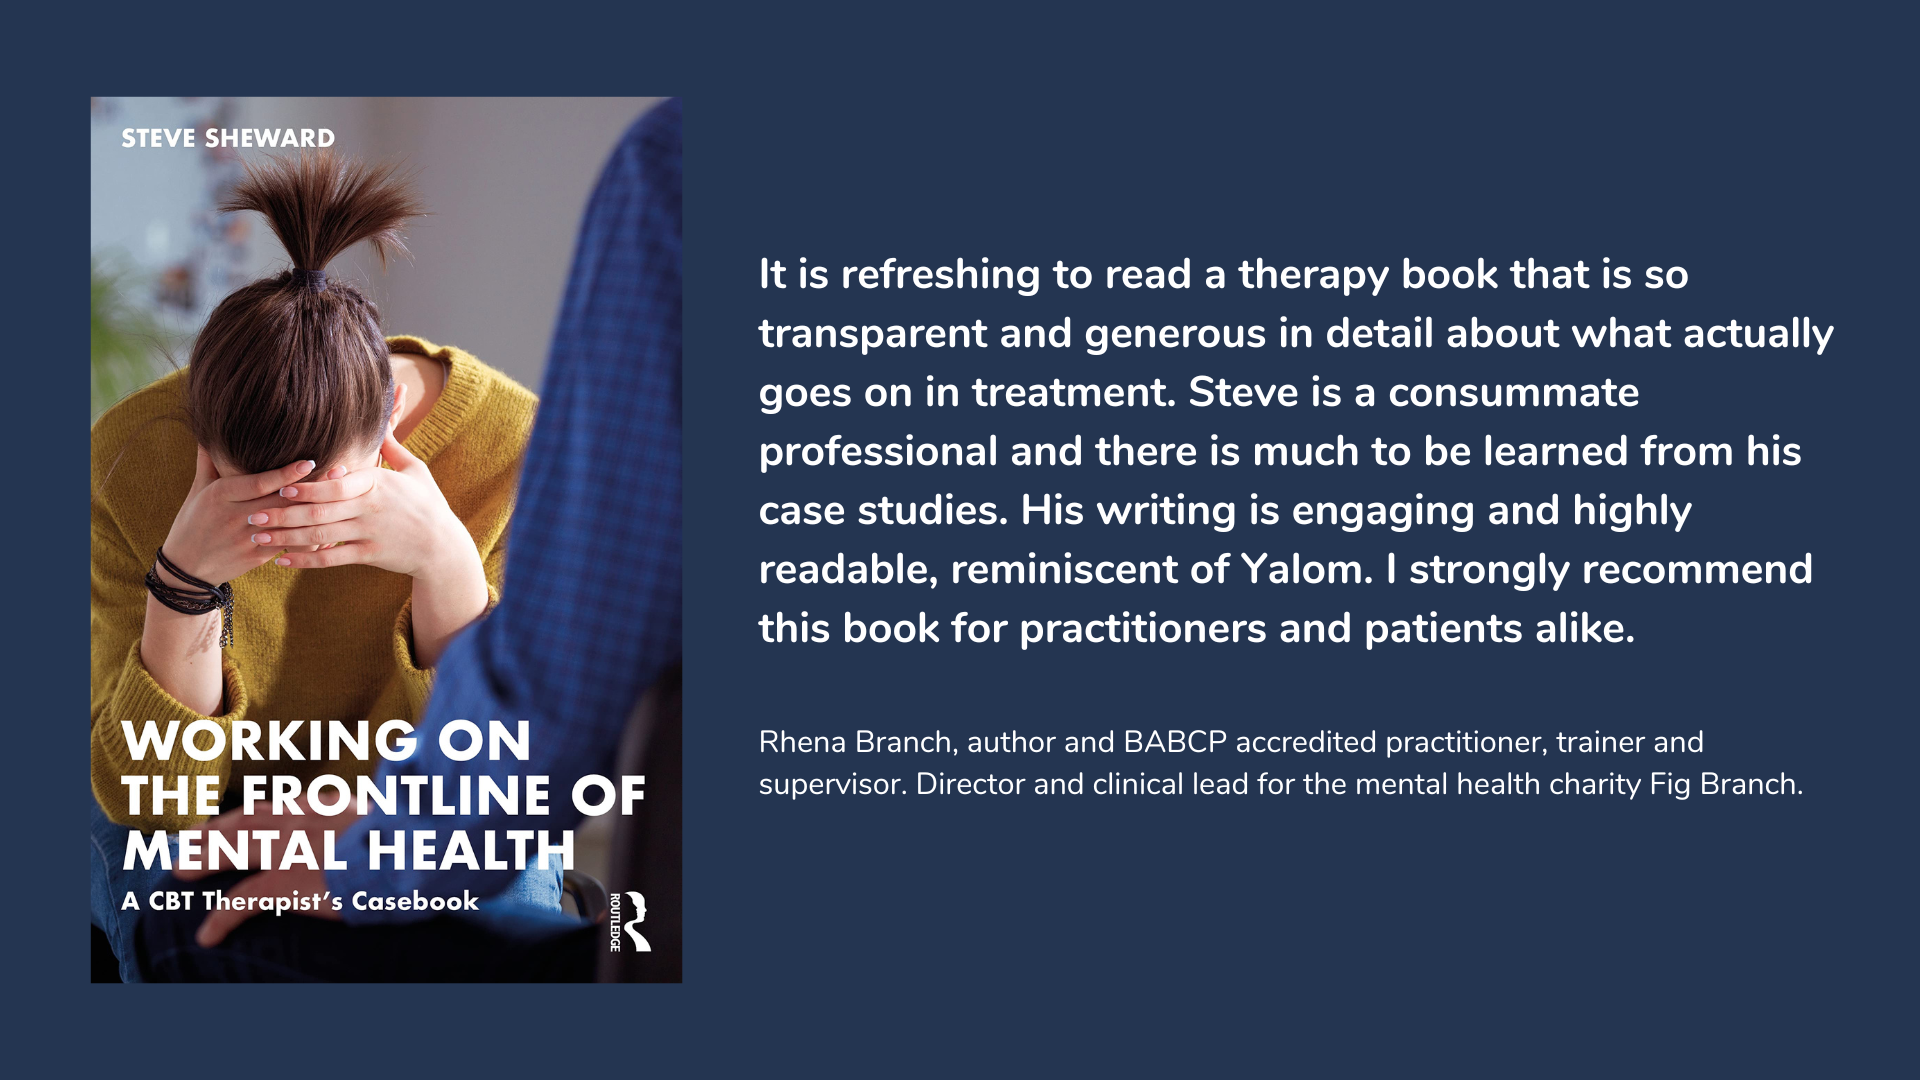 Working on the Frontline of Mental Health: A CBT Therapist's Casebook, book cover and description.